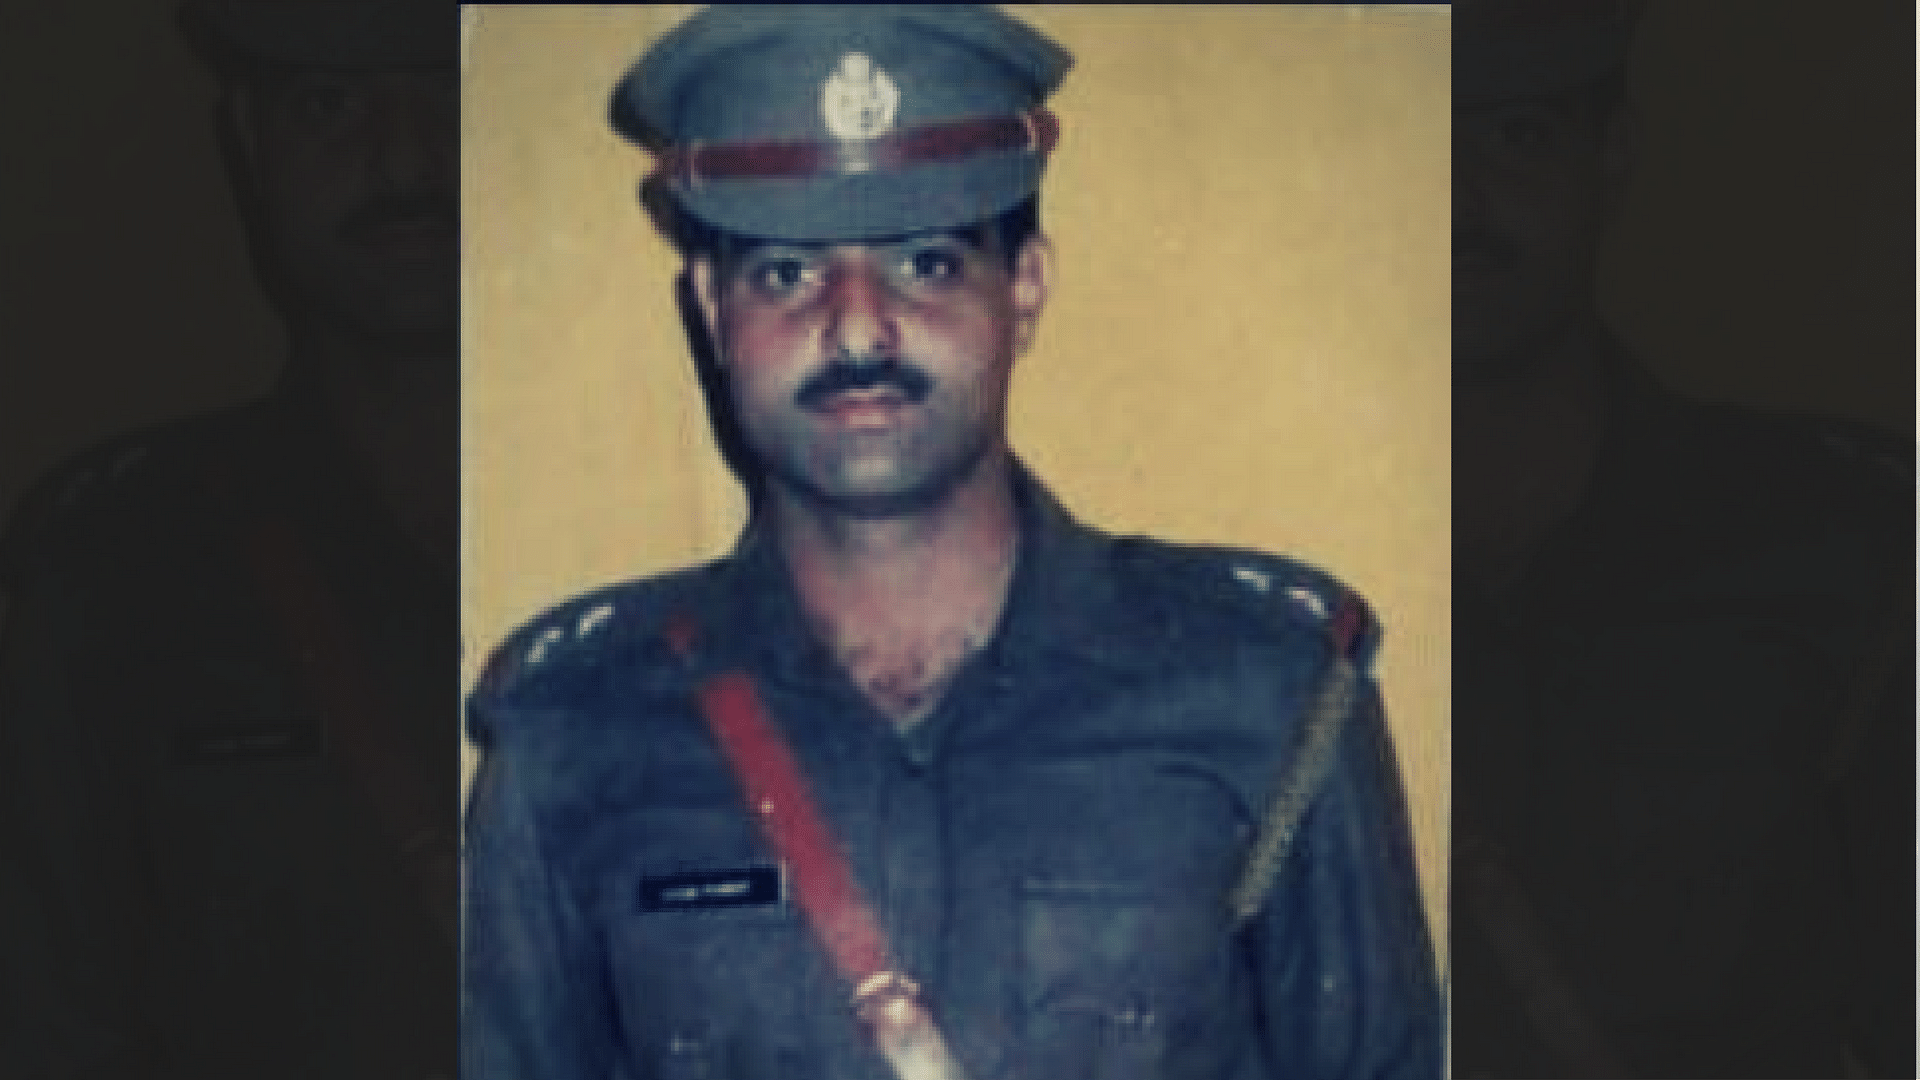 Deputy superintendent of police Mohammed Ayub Pandith who was killed by a mob on Friday. (Photo: Altered by <b>The Quint</b>)